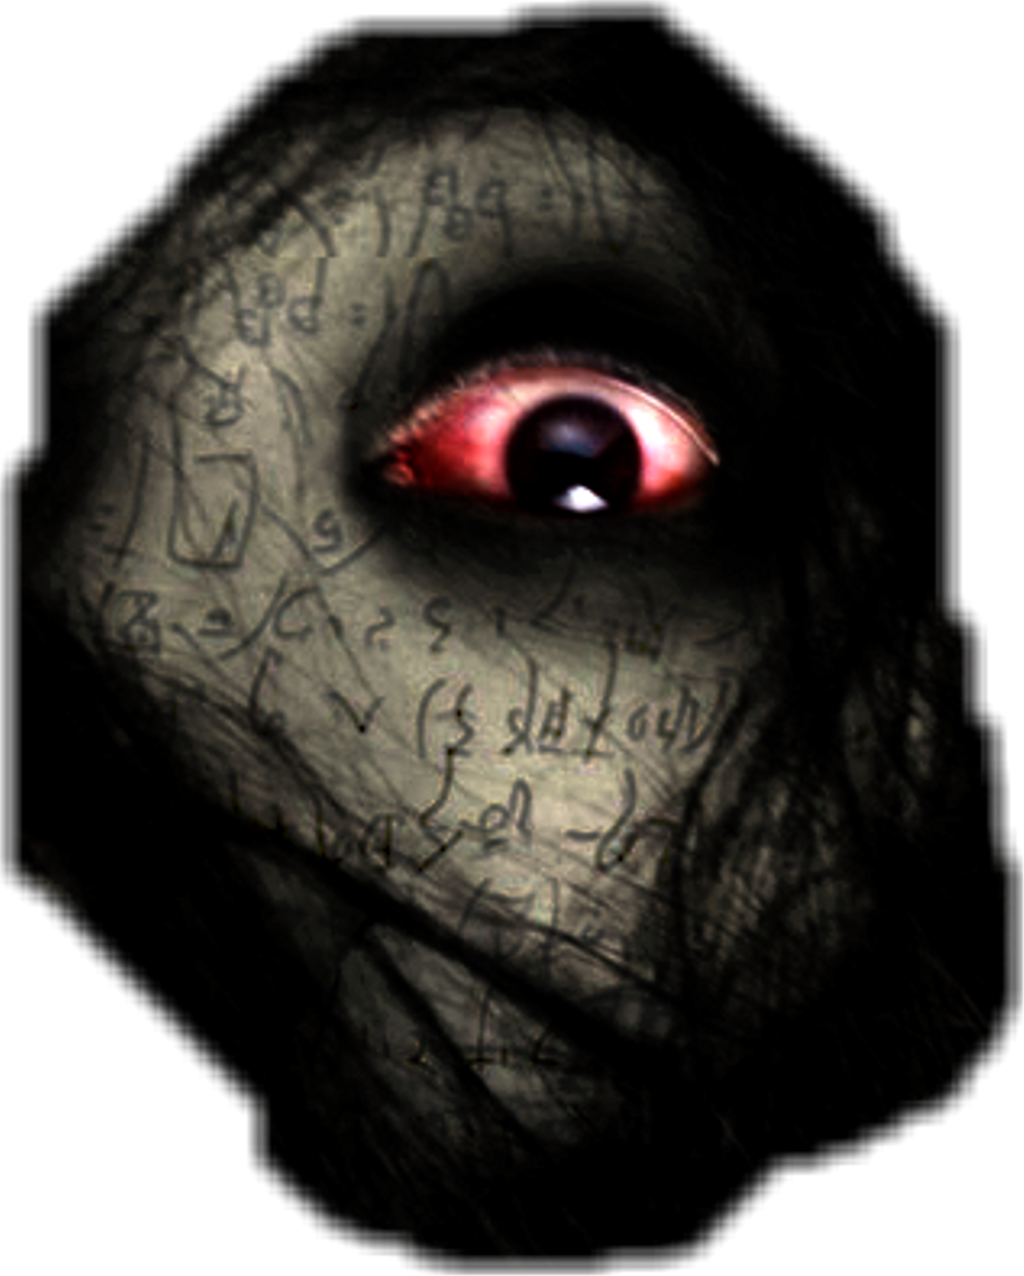 A Close Up Of A Face With A Red Eye